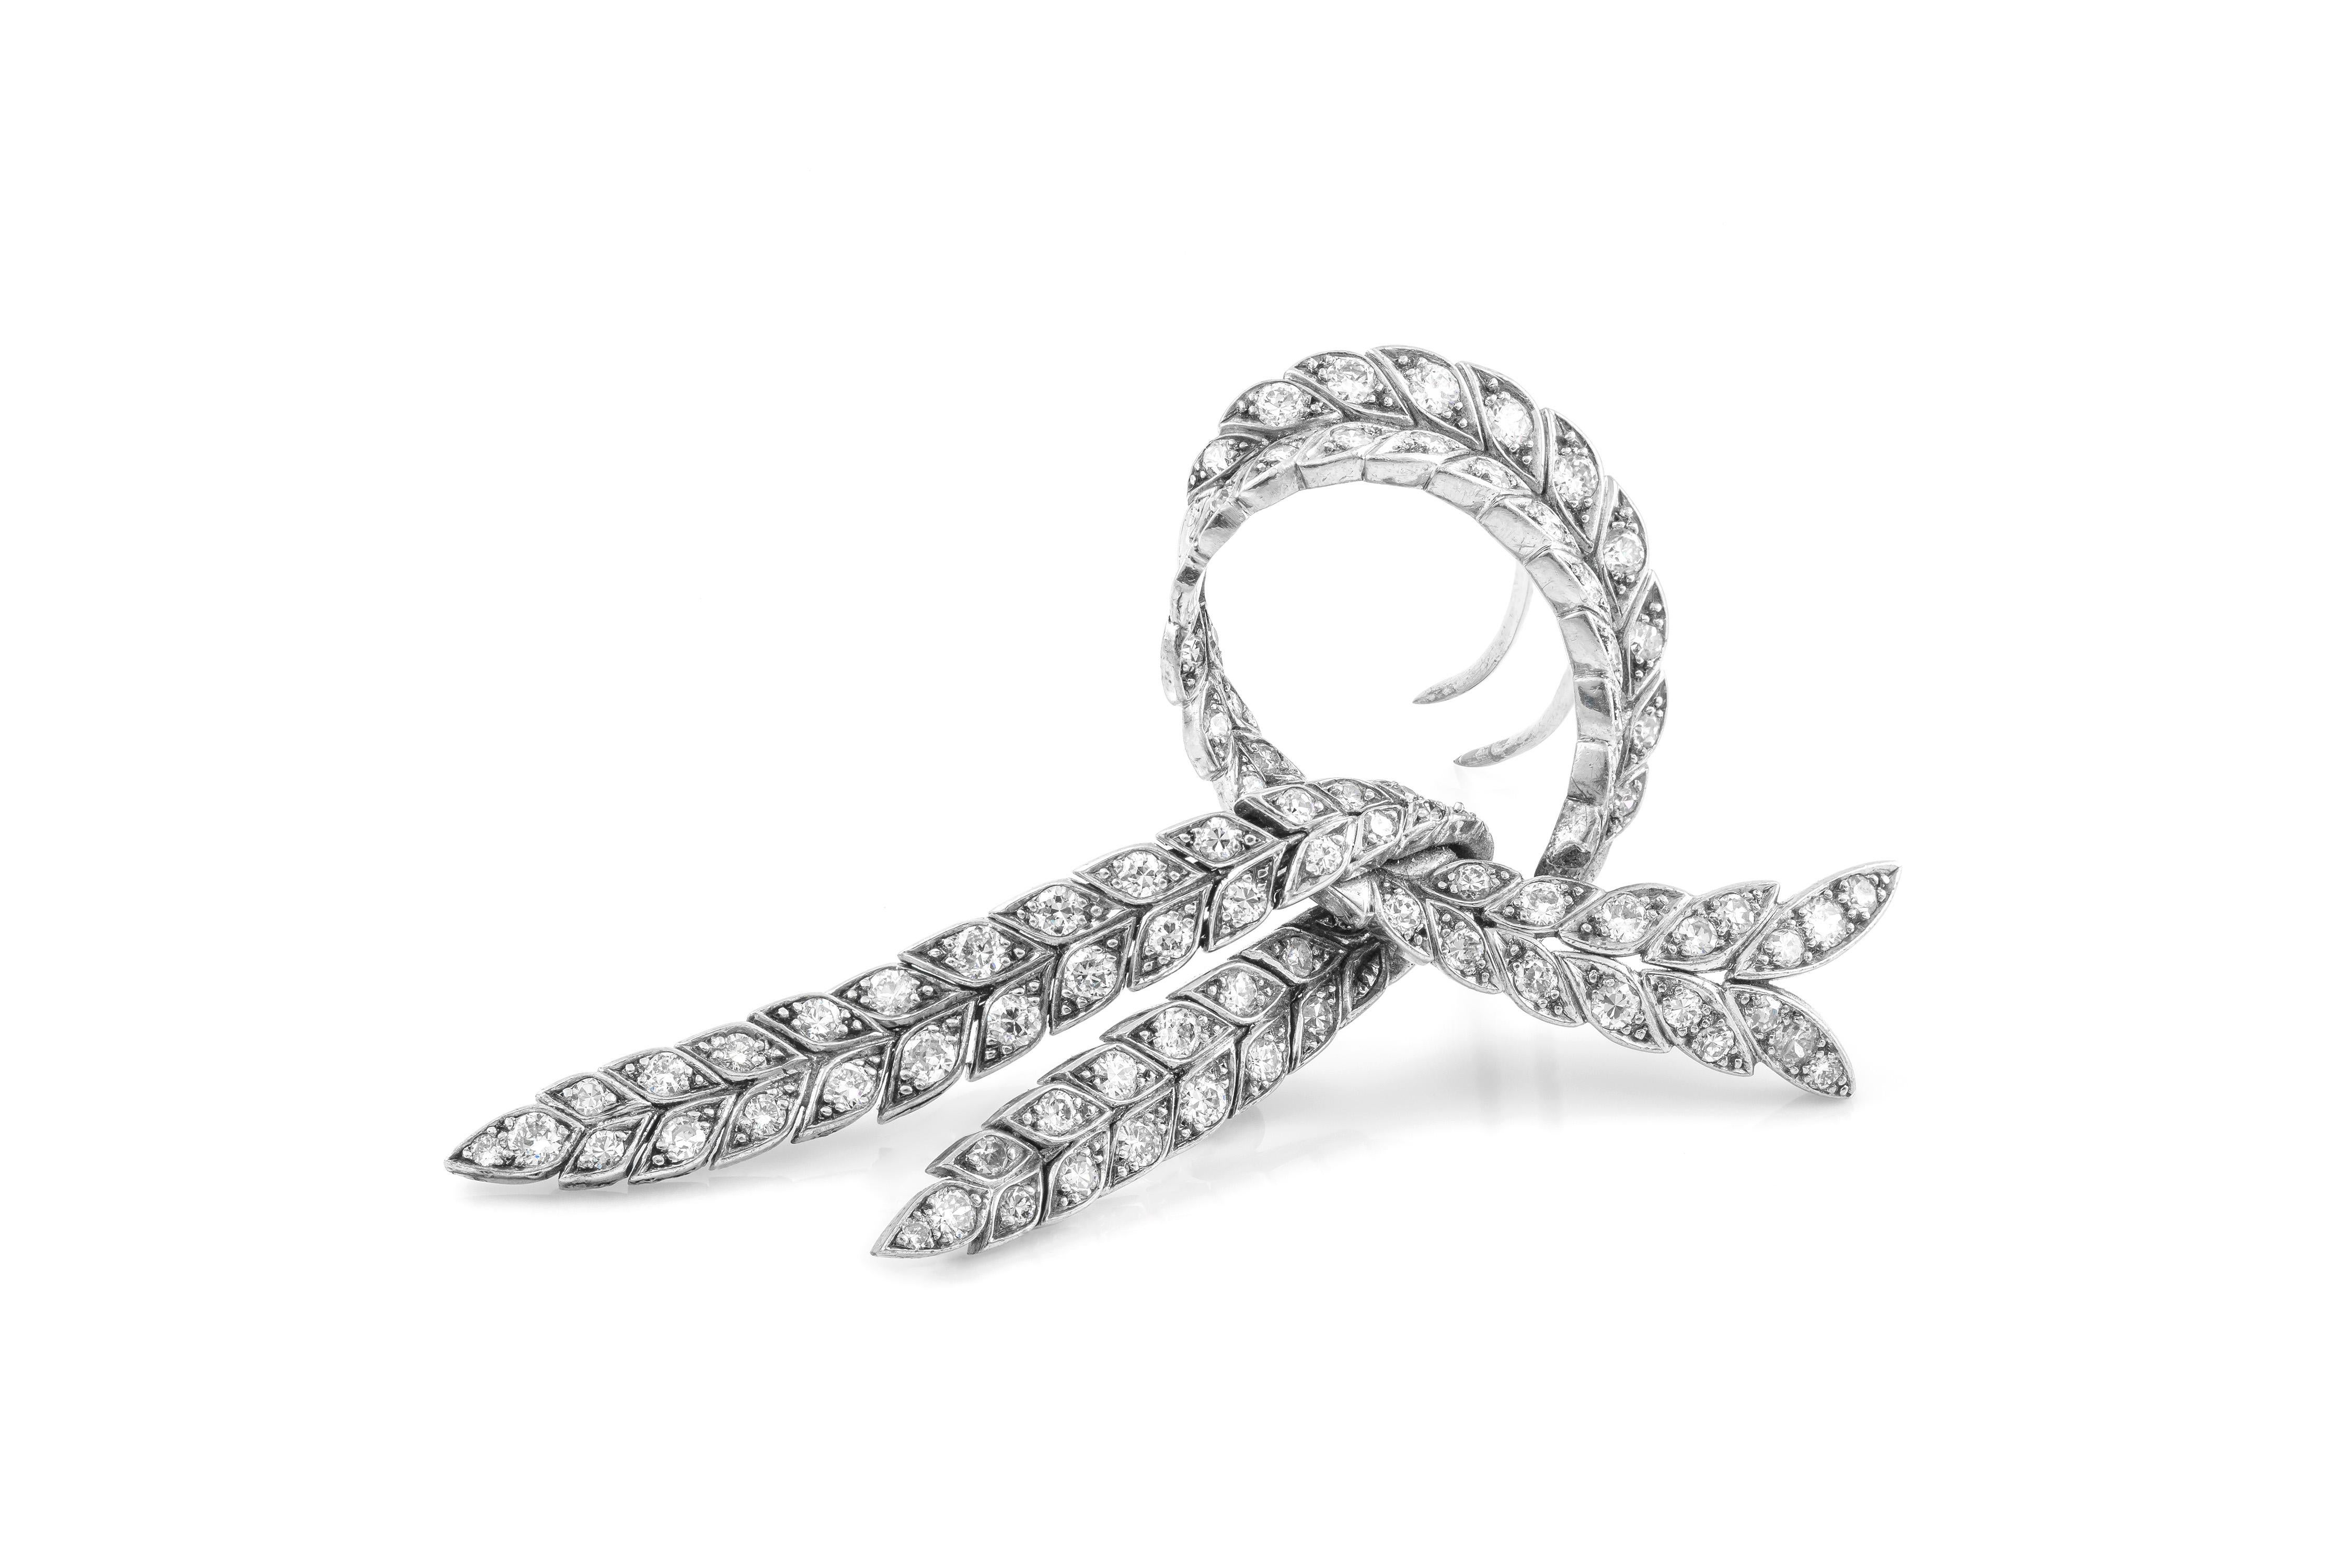 Sterle Leaf Patterned Diamond Brooch In Good Condition For Sale In New York, NY